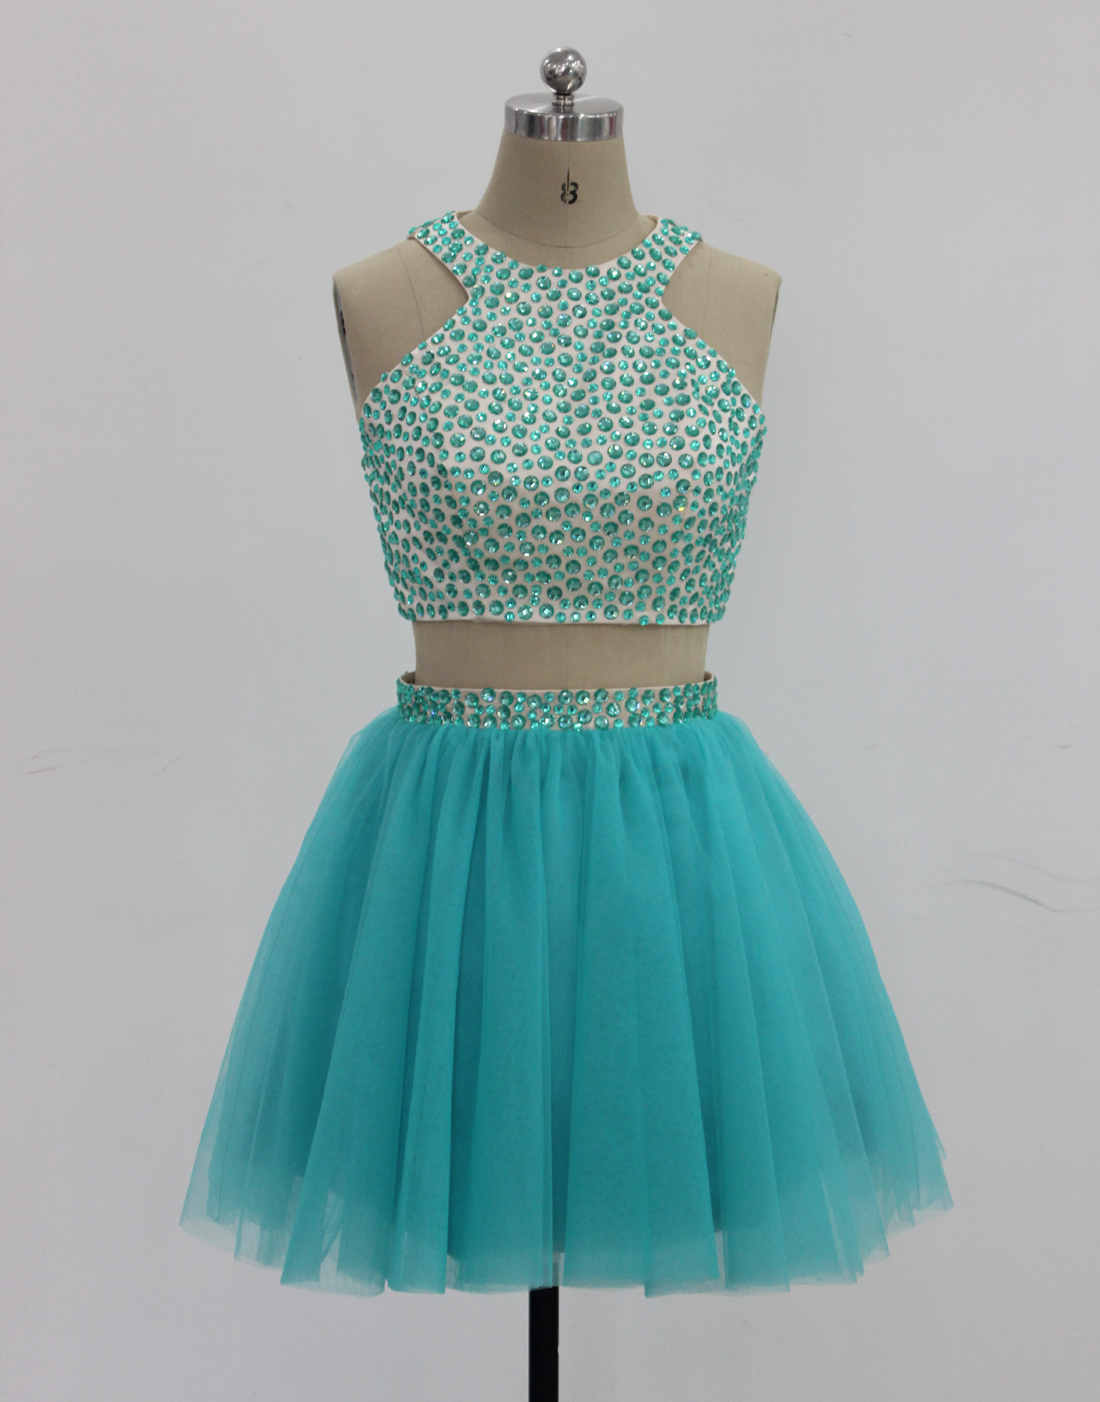 Turquoise Halter Beaded Two-piece Tulle Short Homecoming Dress, Party Dress, Prom Dress